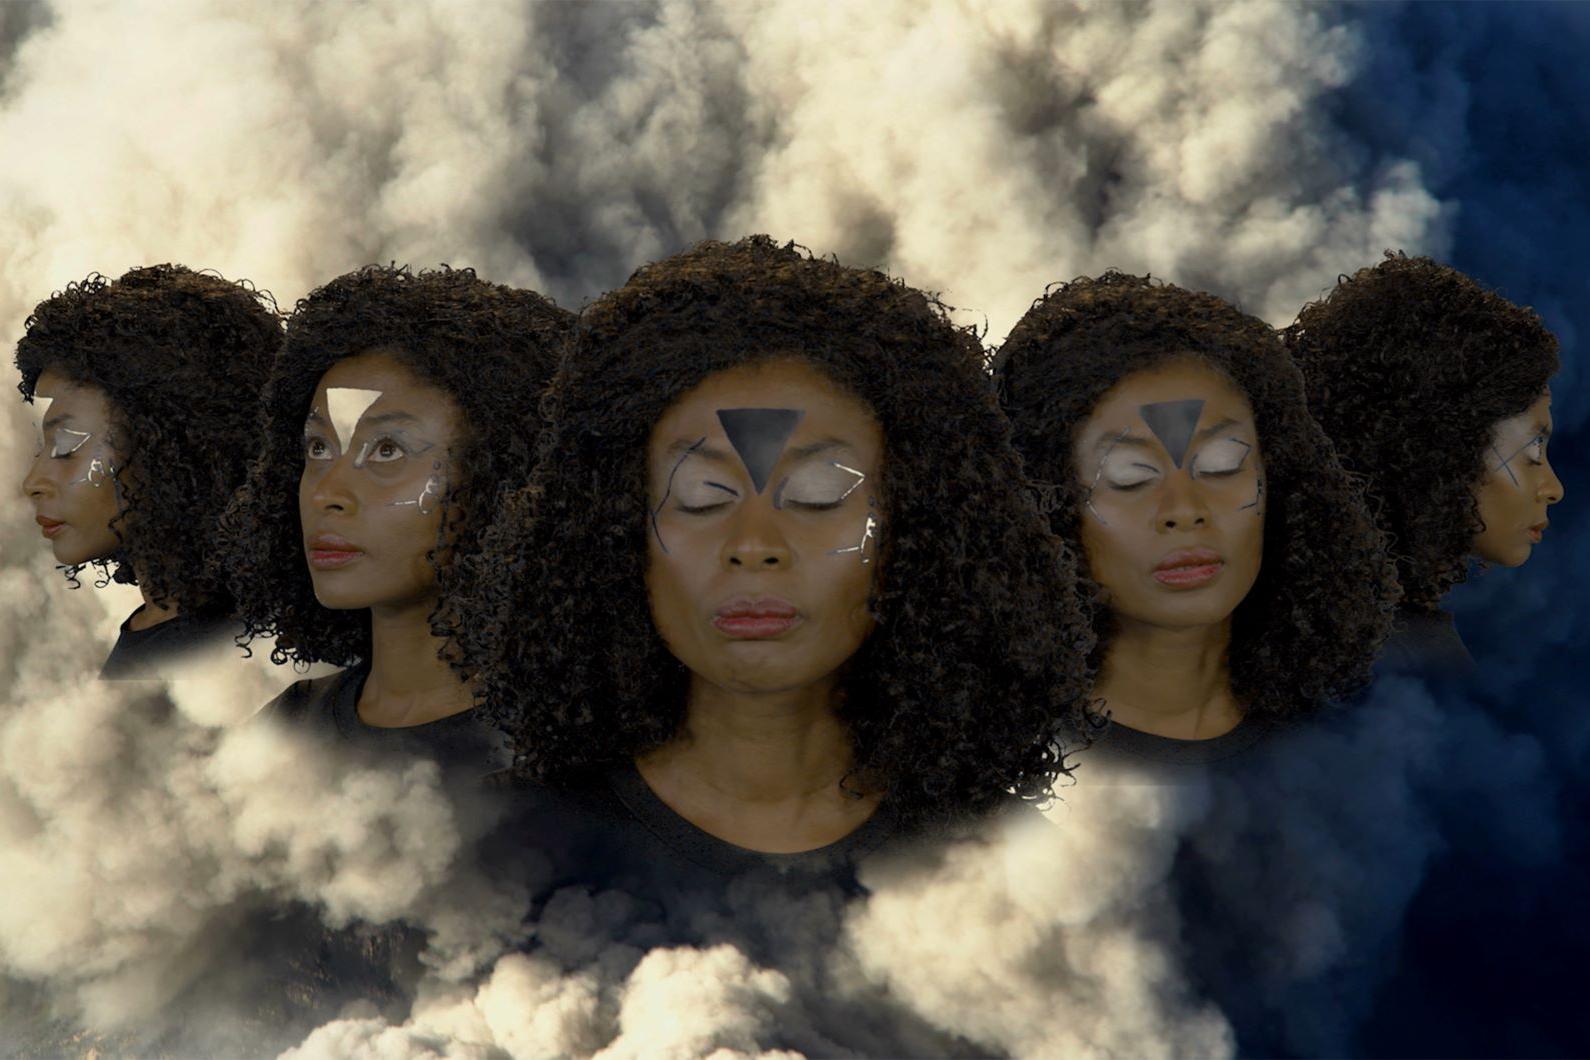 image of a woman from 5 angles over a cloud